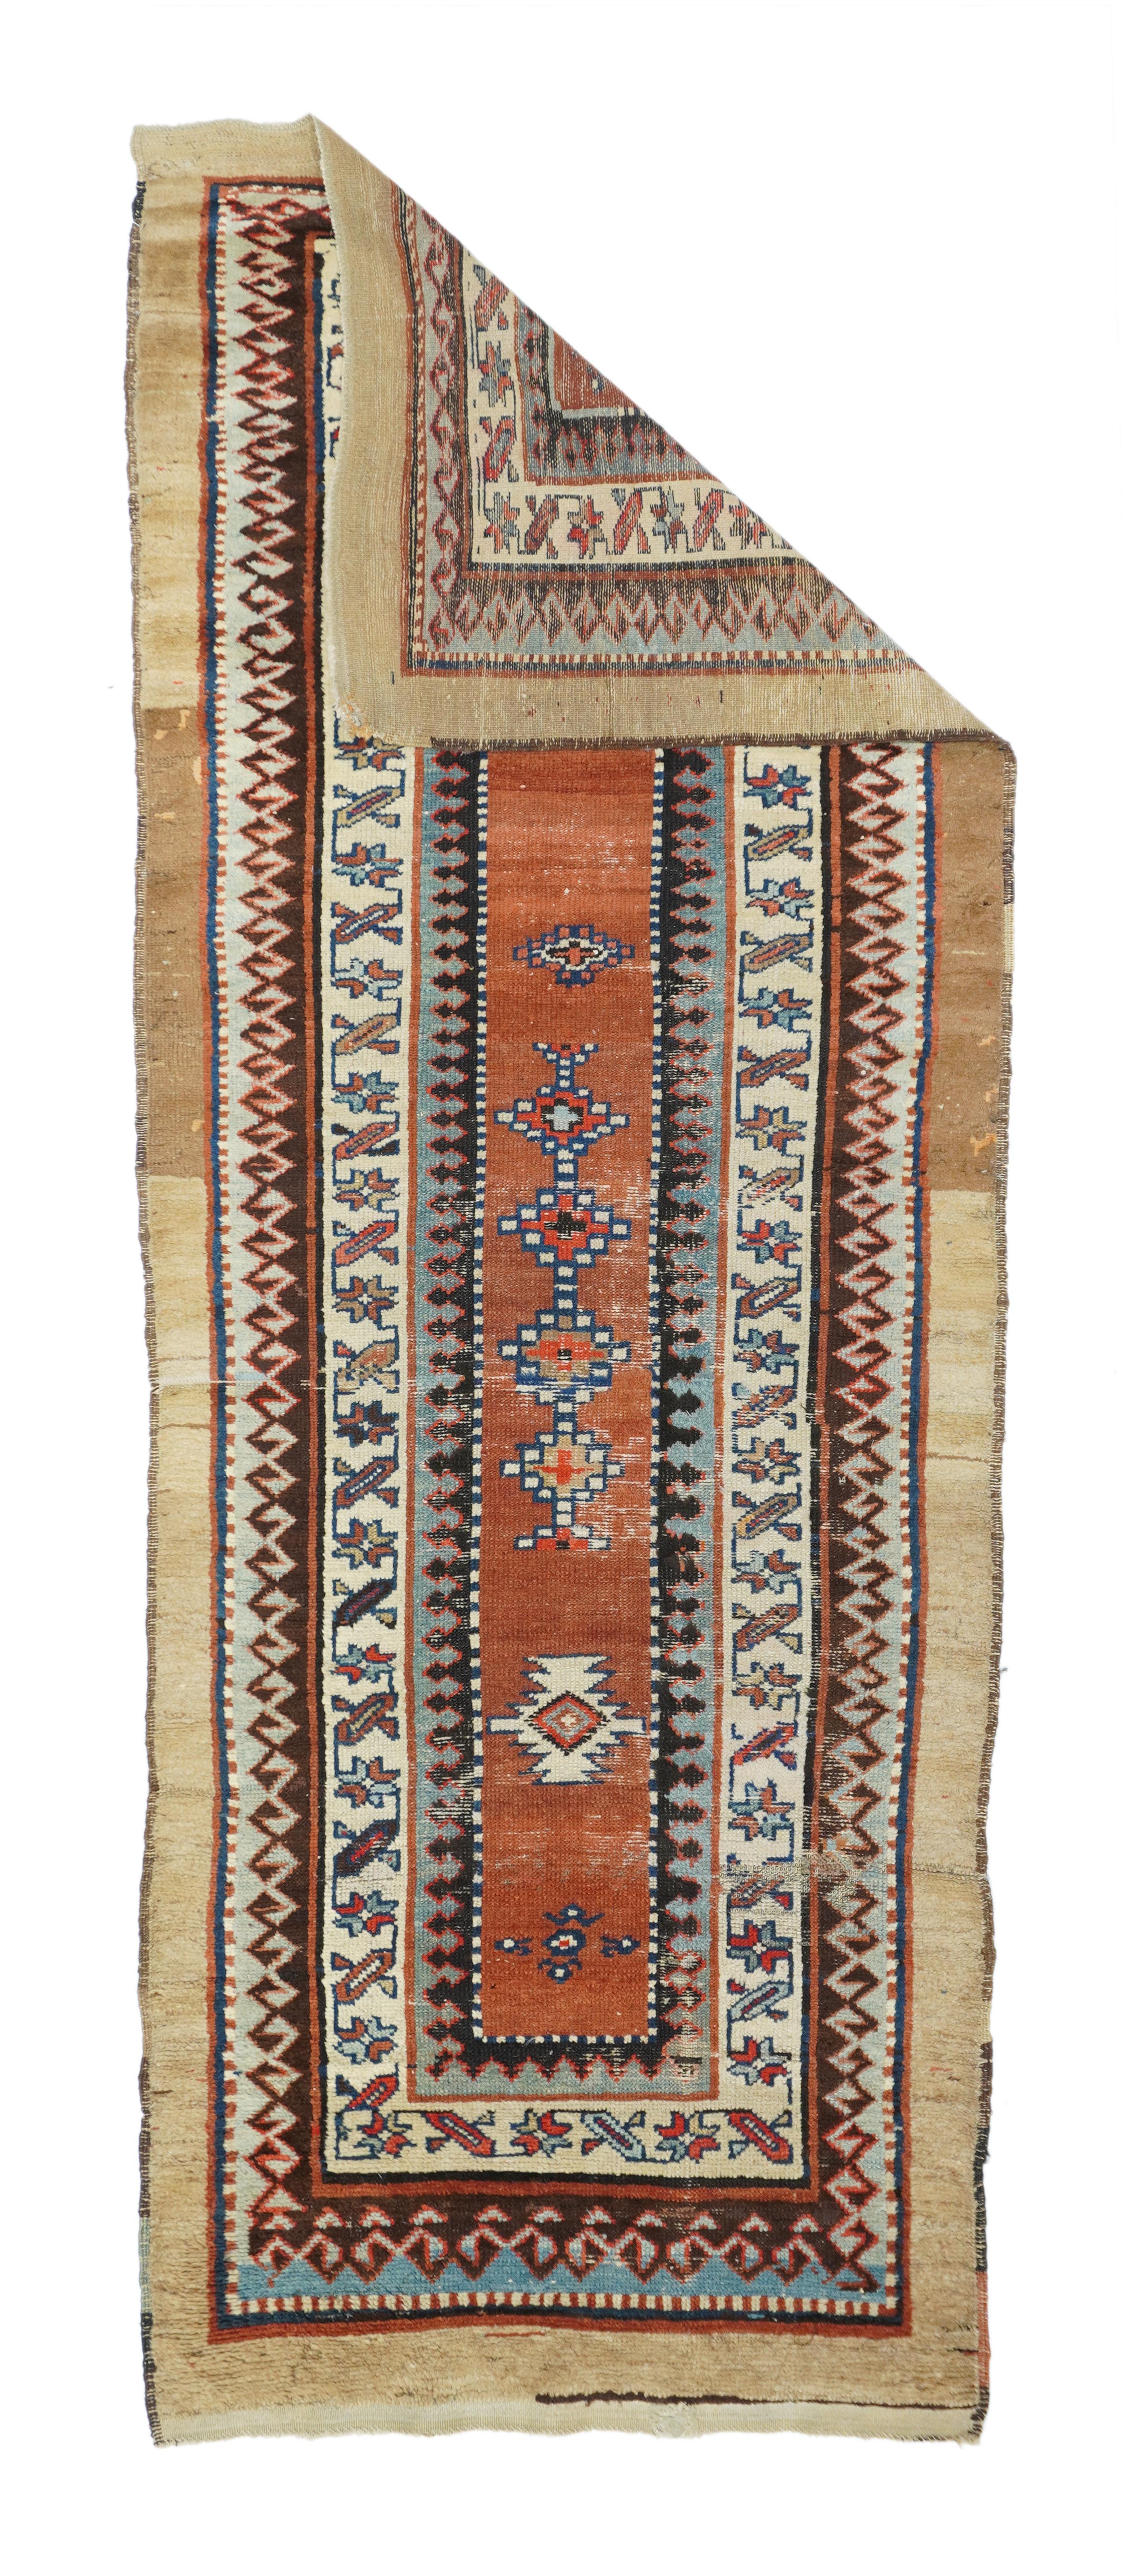 In the Caucasian Talish mode with a narrow madder field displaying a short pole medallion and two ivory ashiks. Abrashed plain camel-tone outer border. Main border of stars and diagonal bars. Wool foundation. Moderate weave. Good condition with full